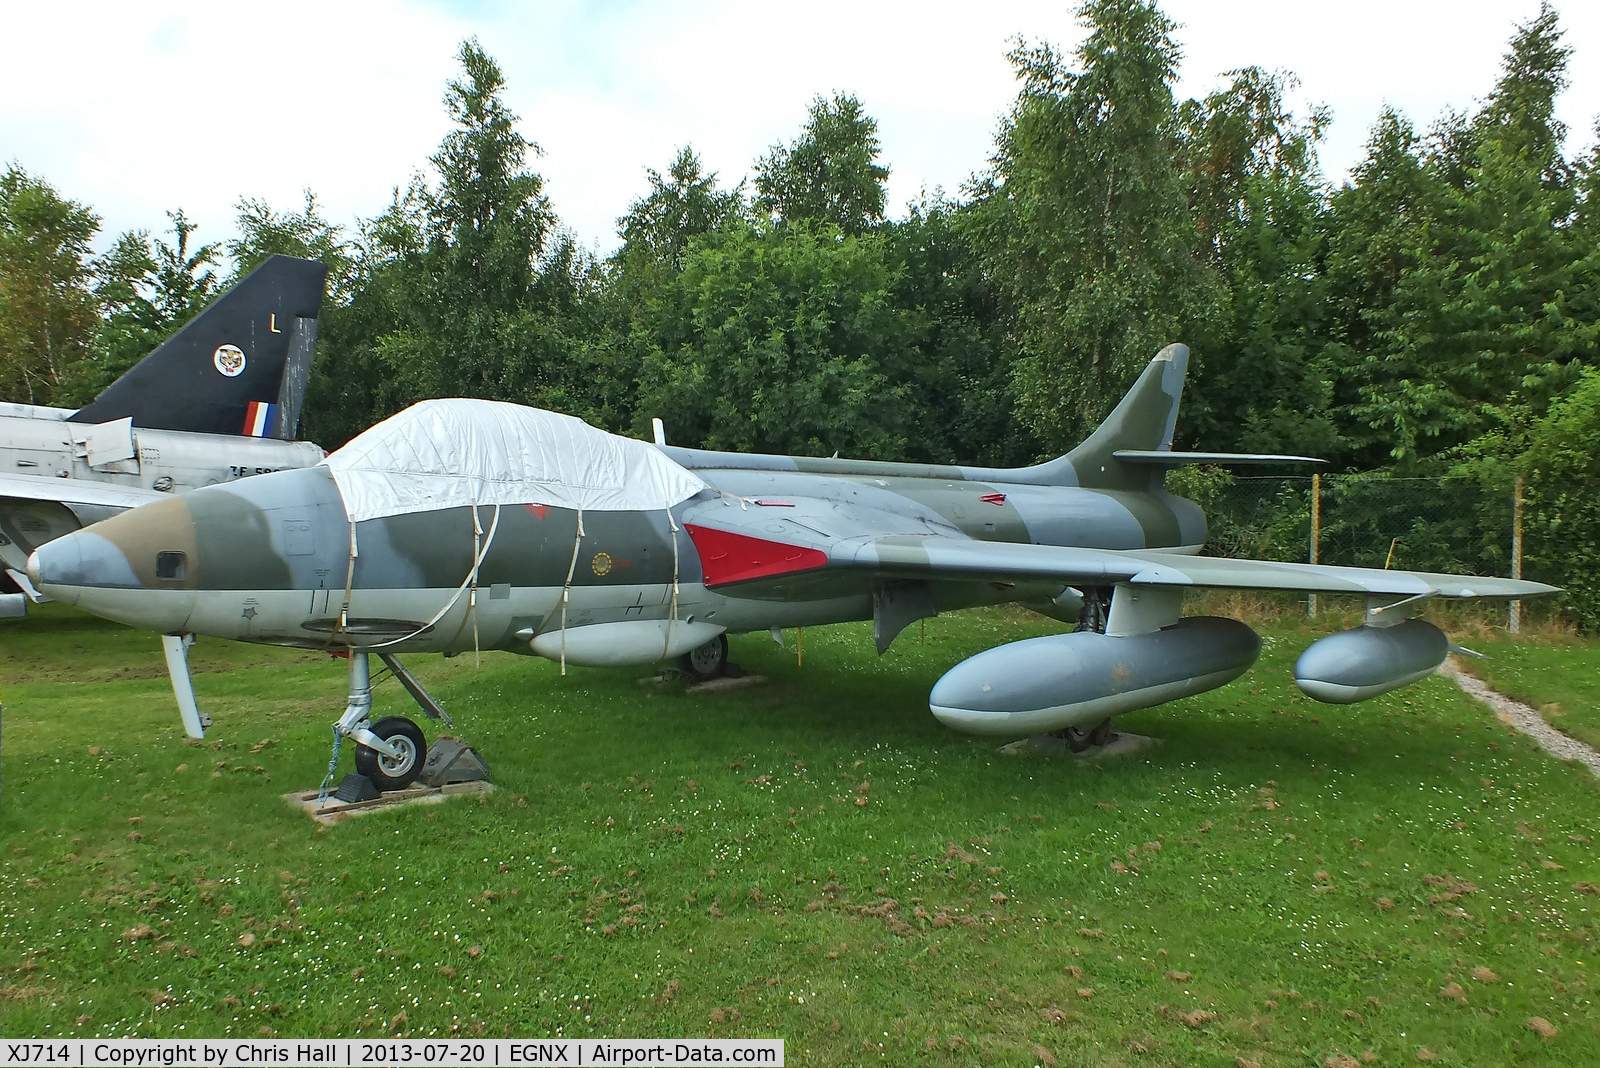 XJ714, 1957 Hawker Hunter FR.10 C/N 41H/688089, Composite airframe built from unwanted spares from WT684, XF383, XM126, XG226, PH-NLH & ET-272, Preserved at the East Midlands Aeropark